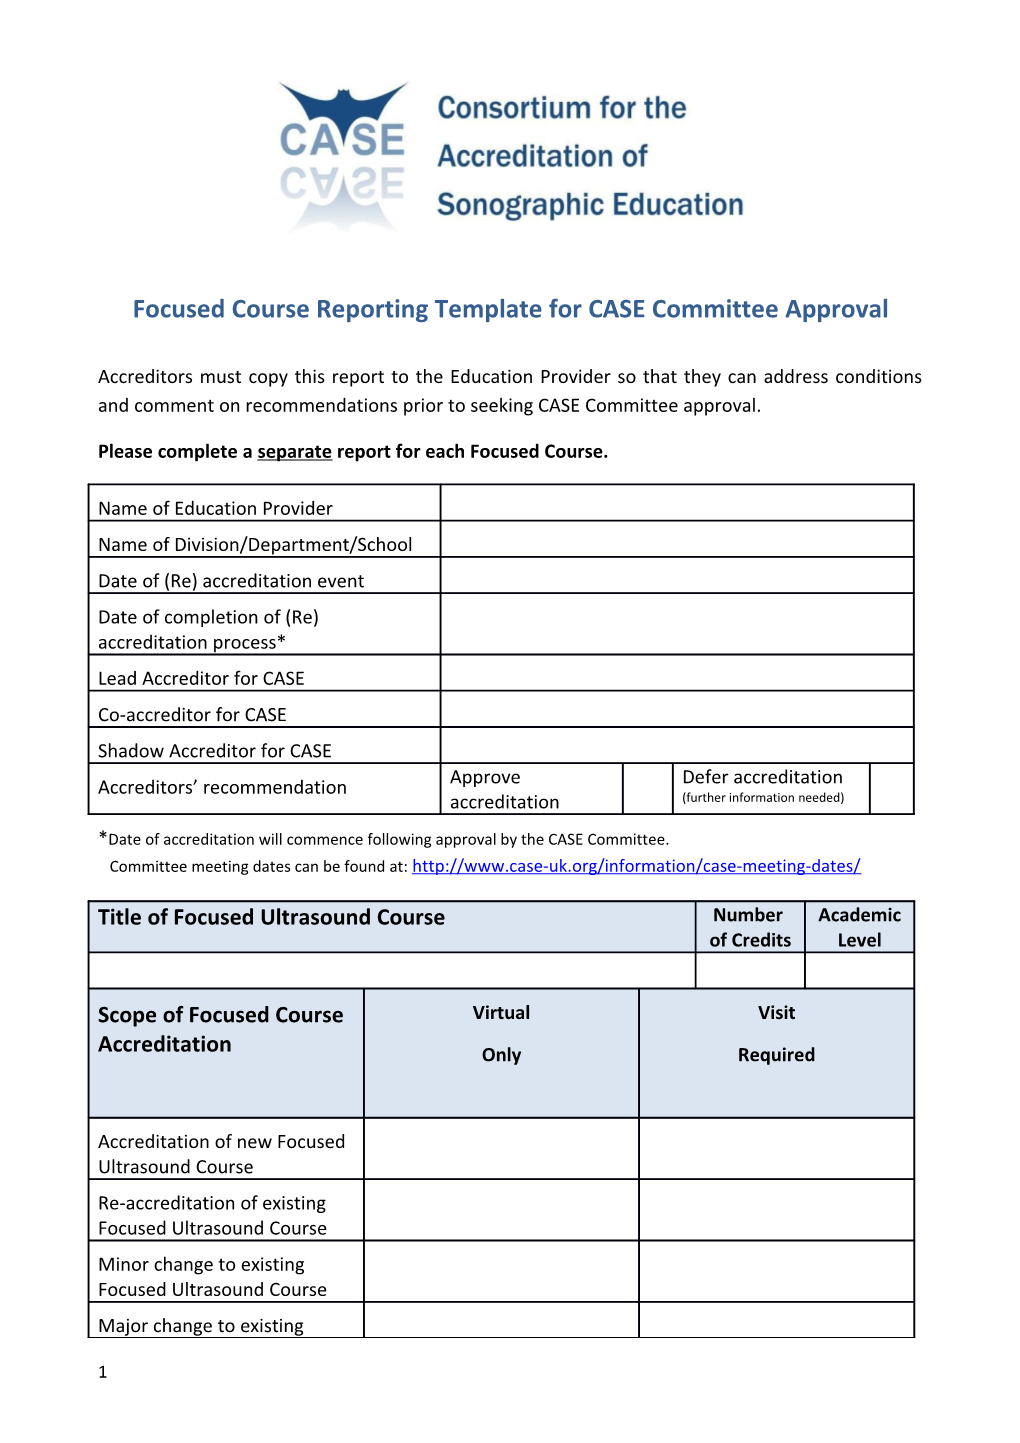 Focused Coursereporting Template for CASE Committee Approval